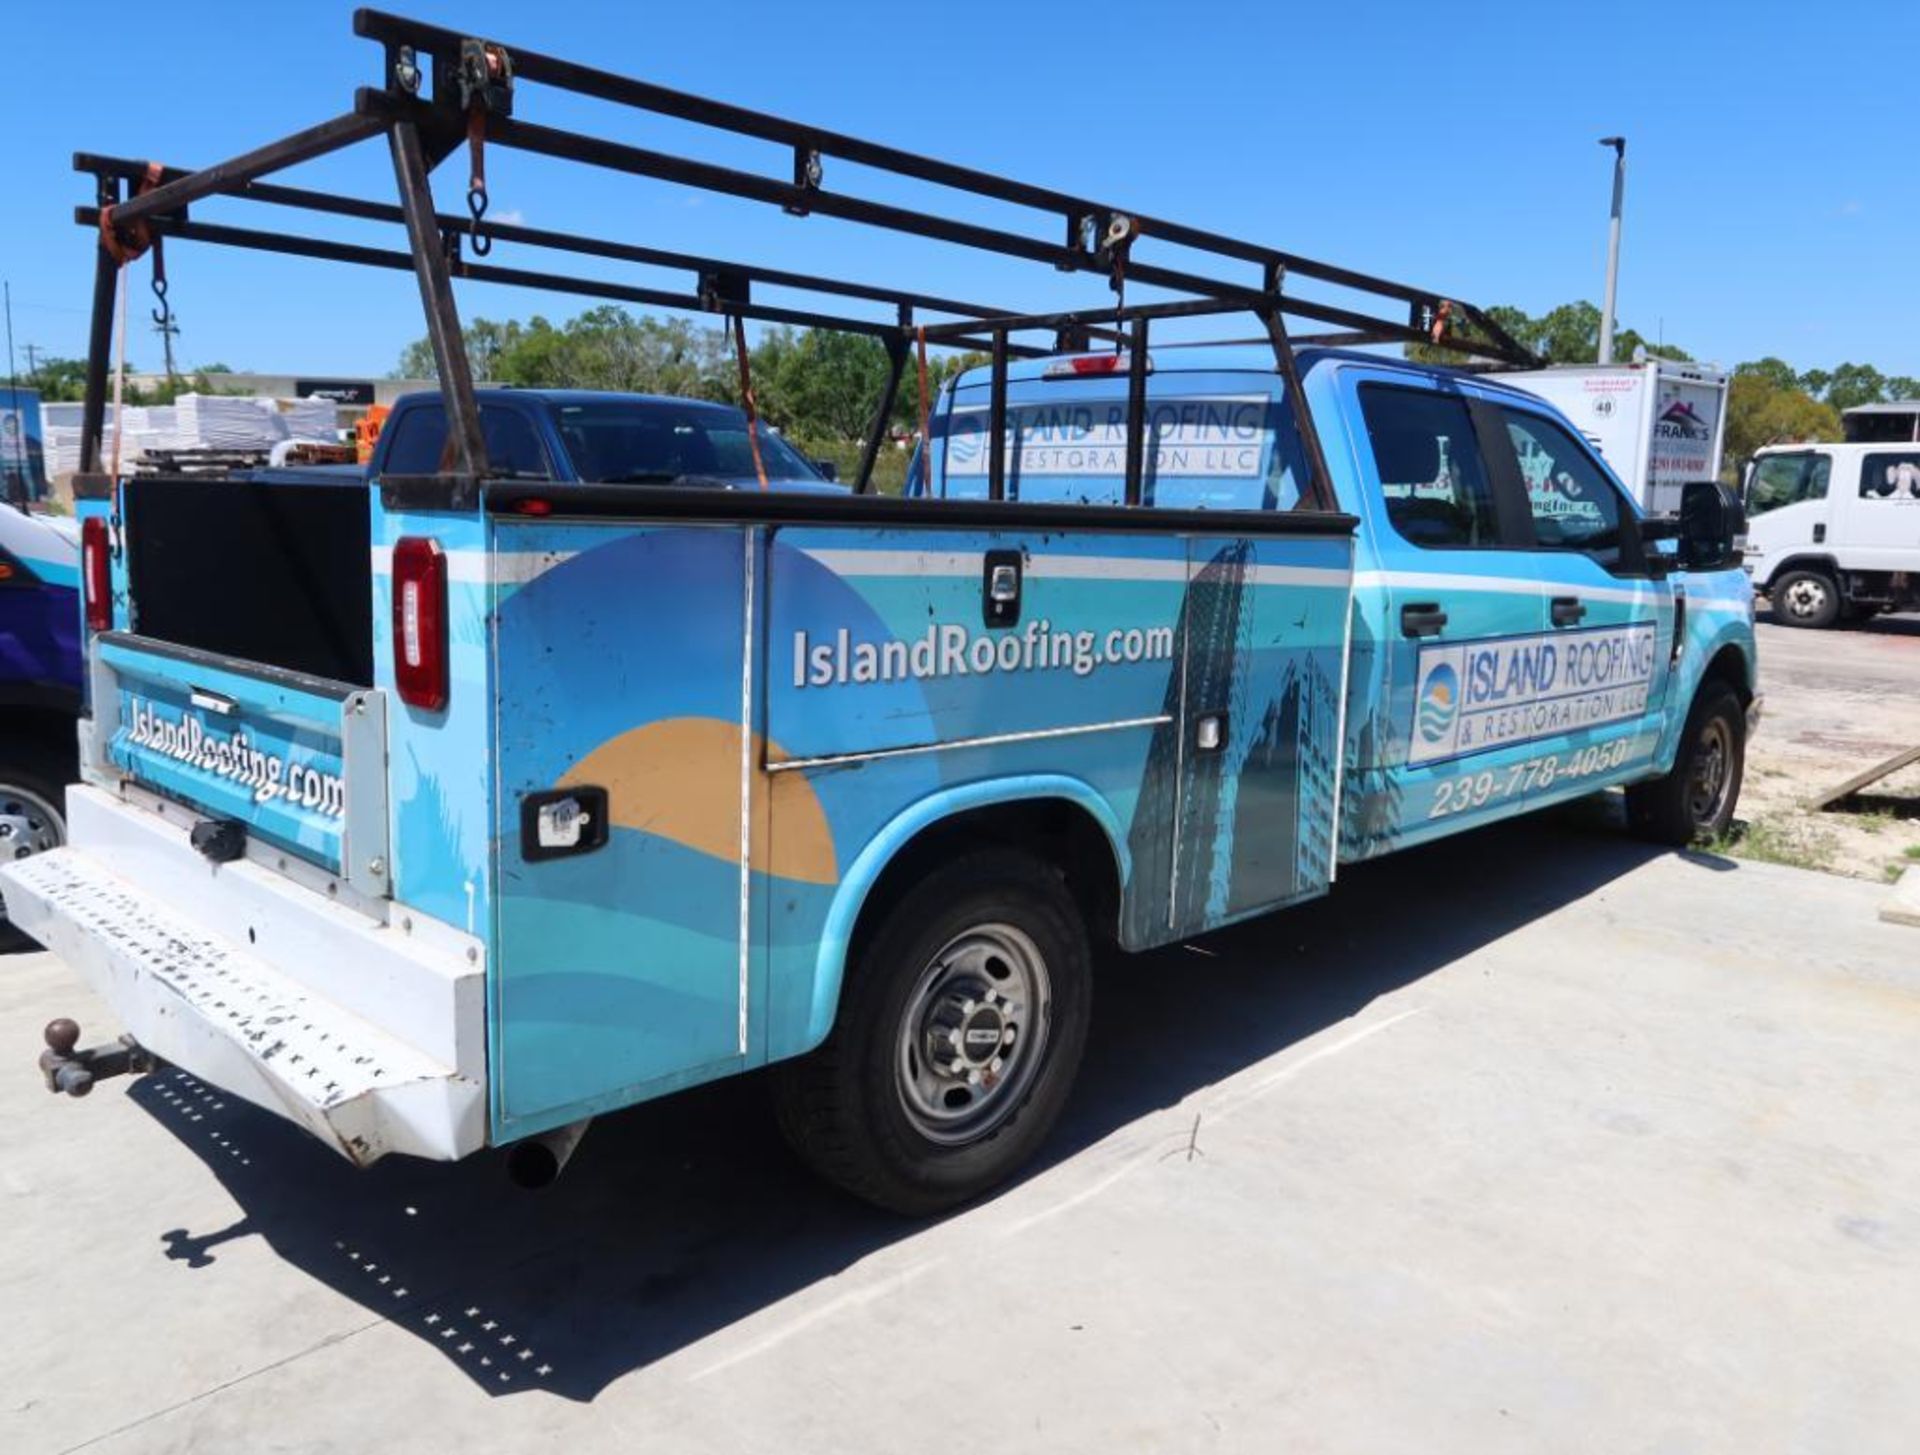 2019 Ford F-250 4 Door Service Body w/Ladder Rack, Gas, License# LVW-H83, VIN 1FD7W2A66KED43926, 88, - Image 2 of 6